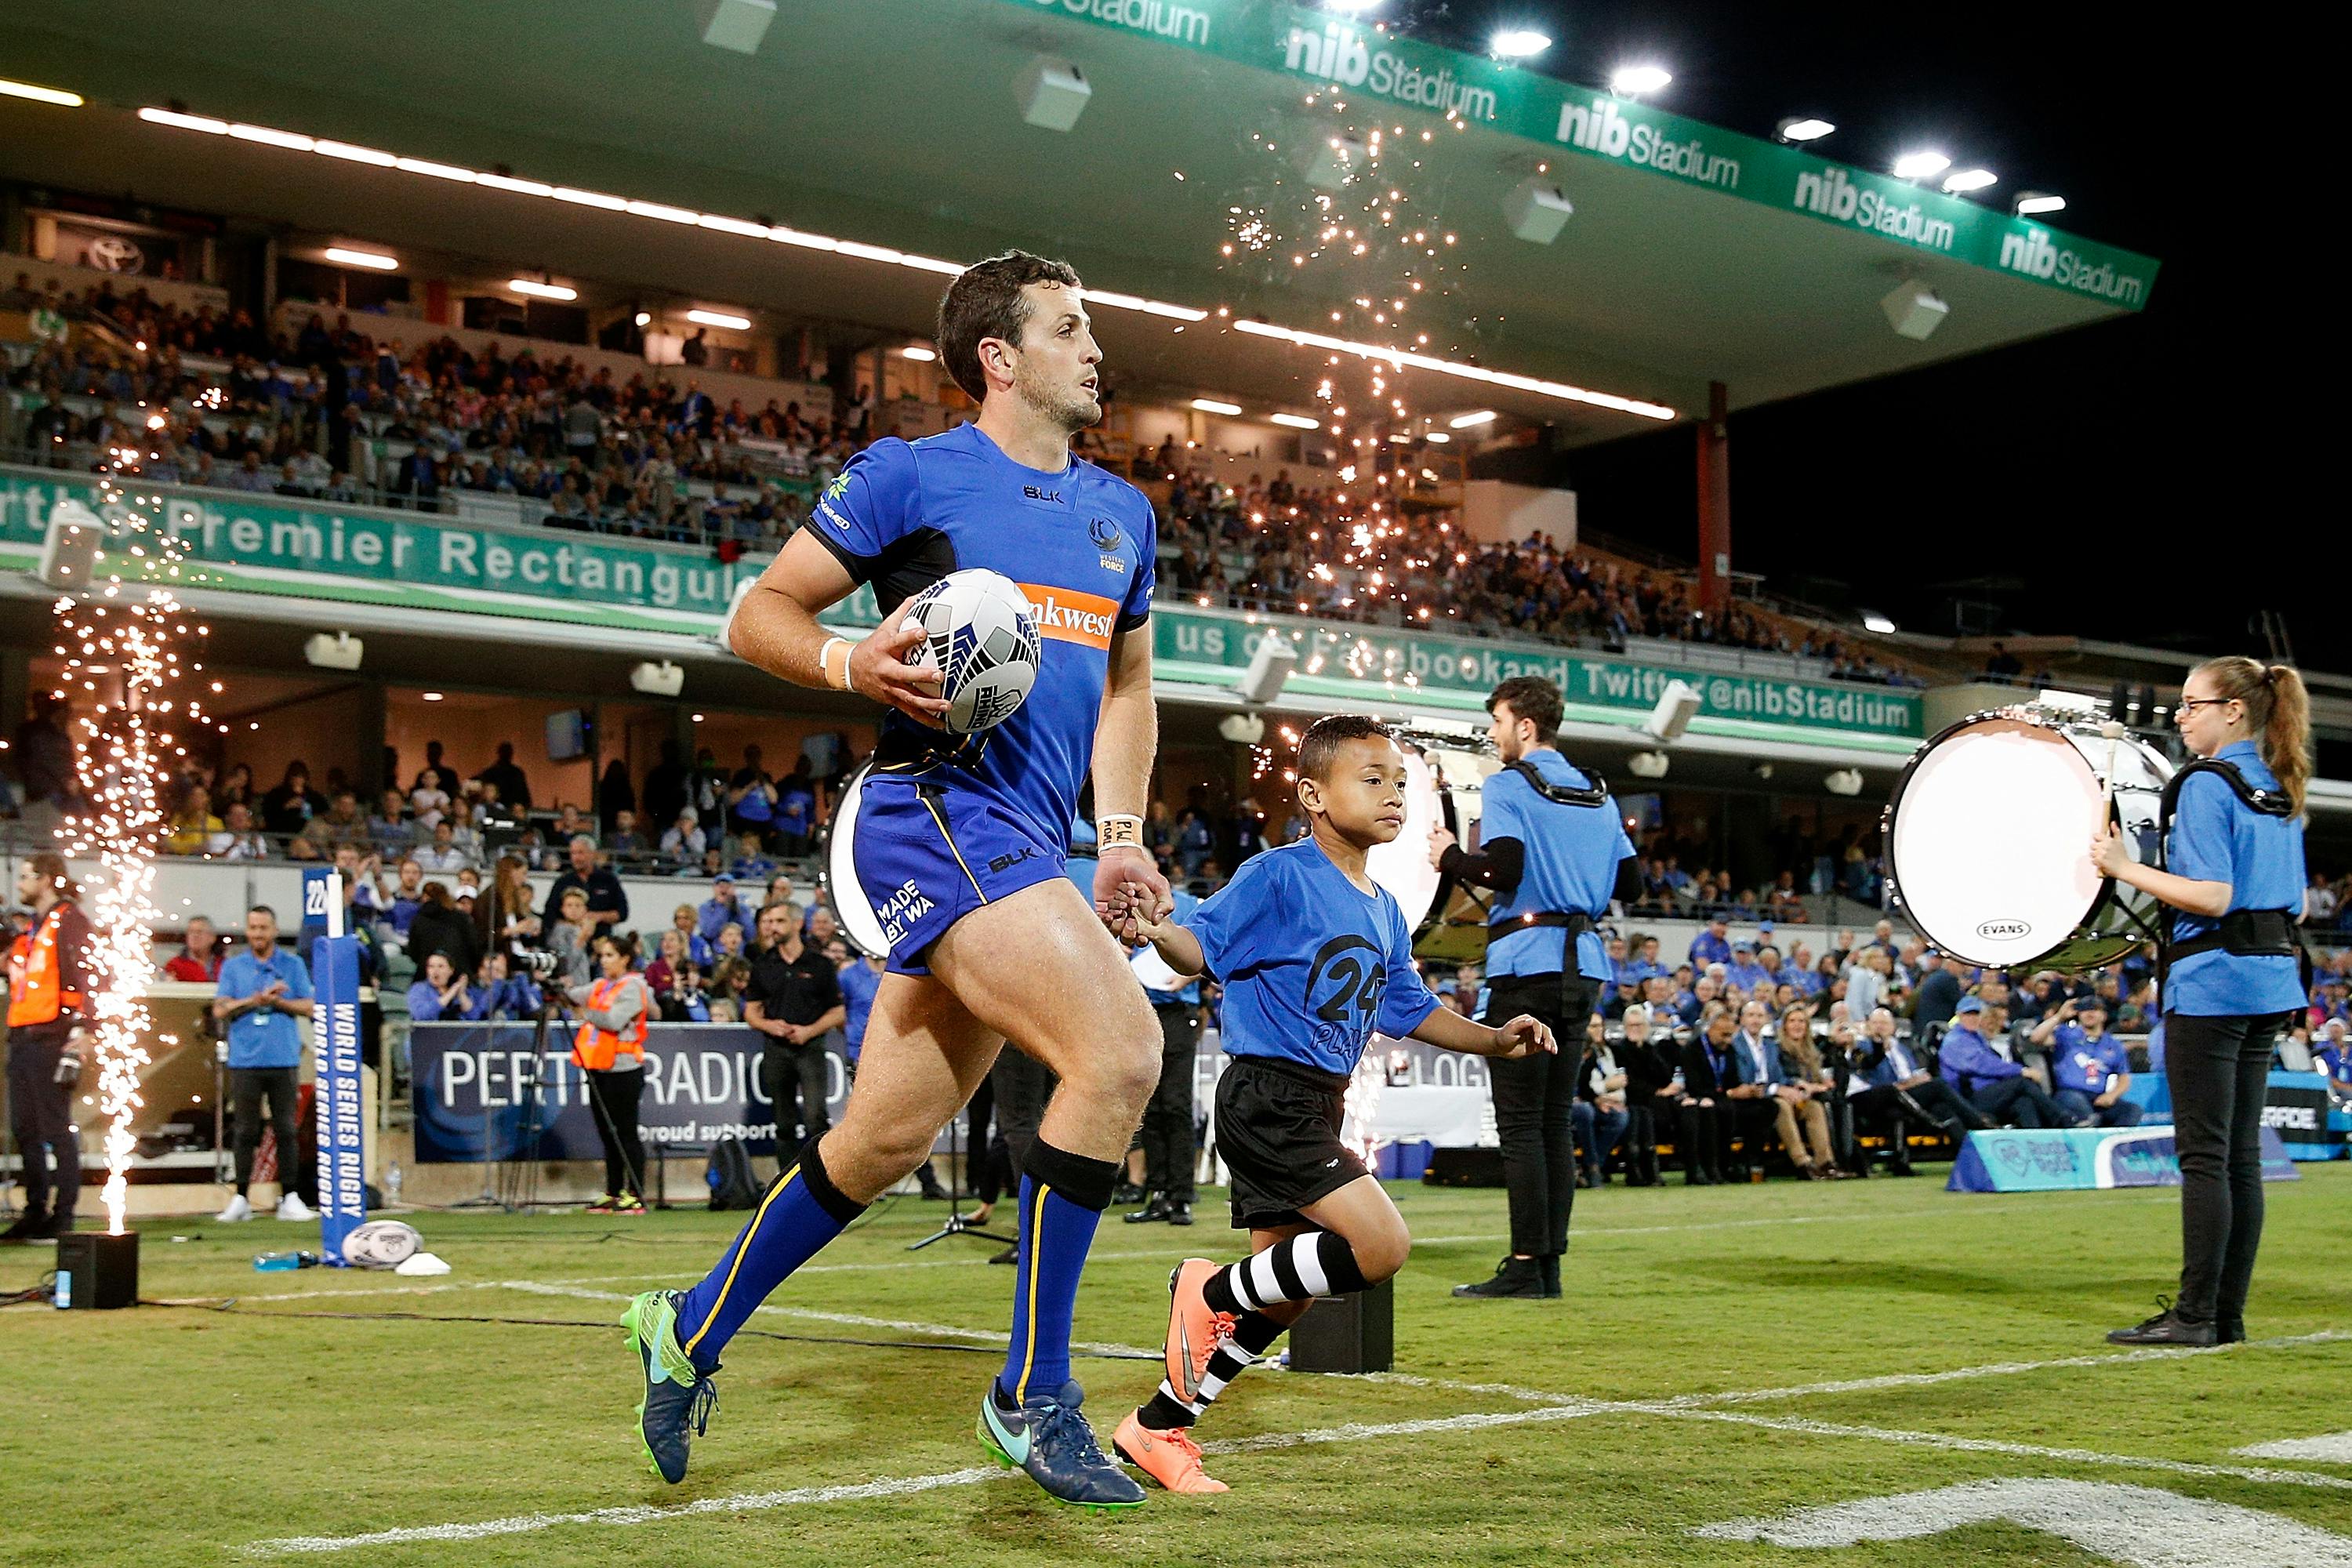 Prior during the World Series Rugby match between the Western Force and the Fiji Warriors at nib Stadium on May 4, 2018 in Perth, Australia.